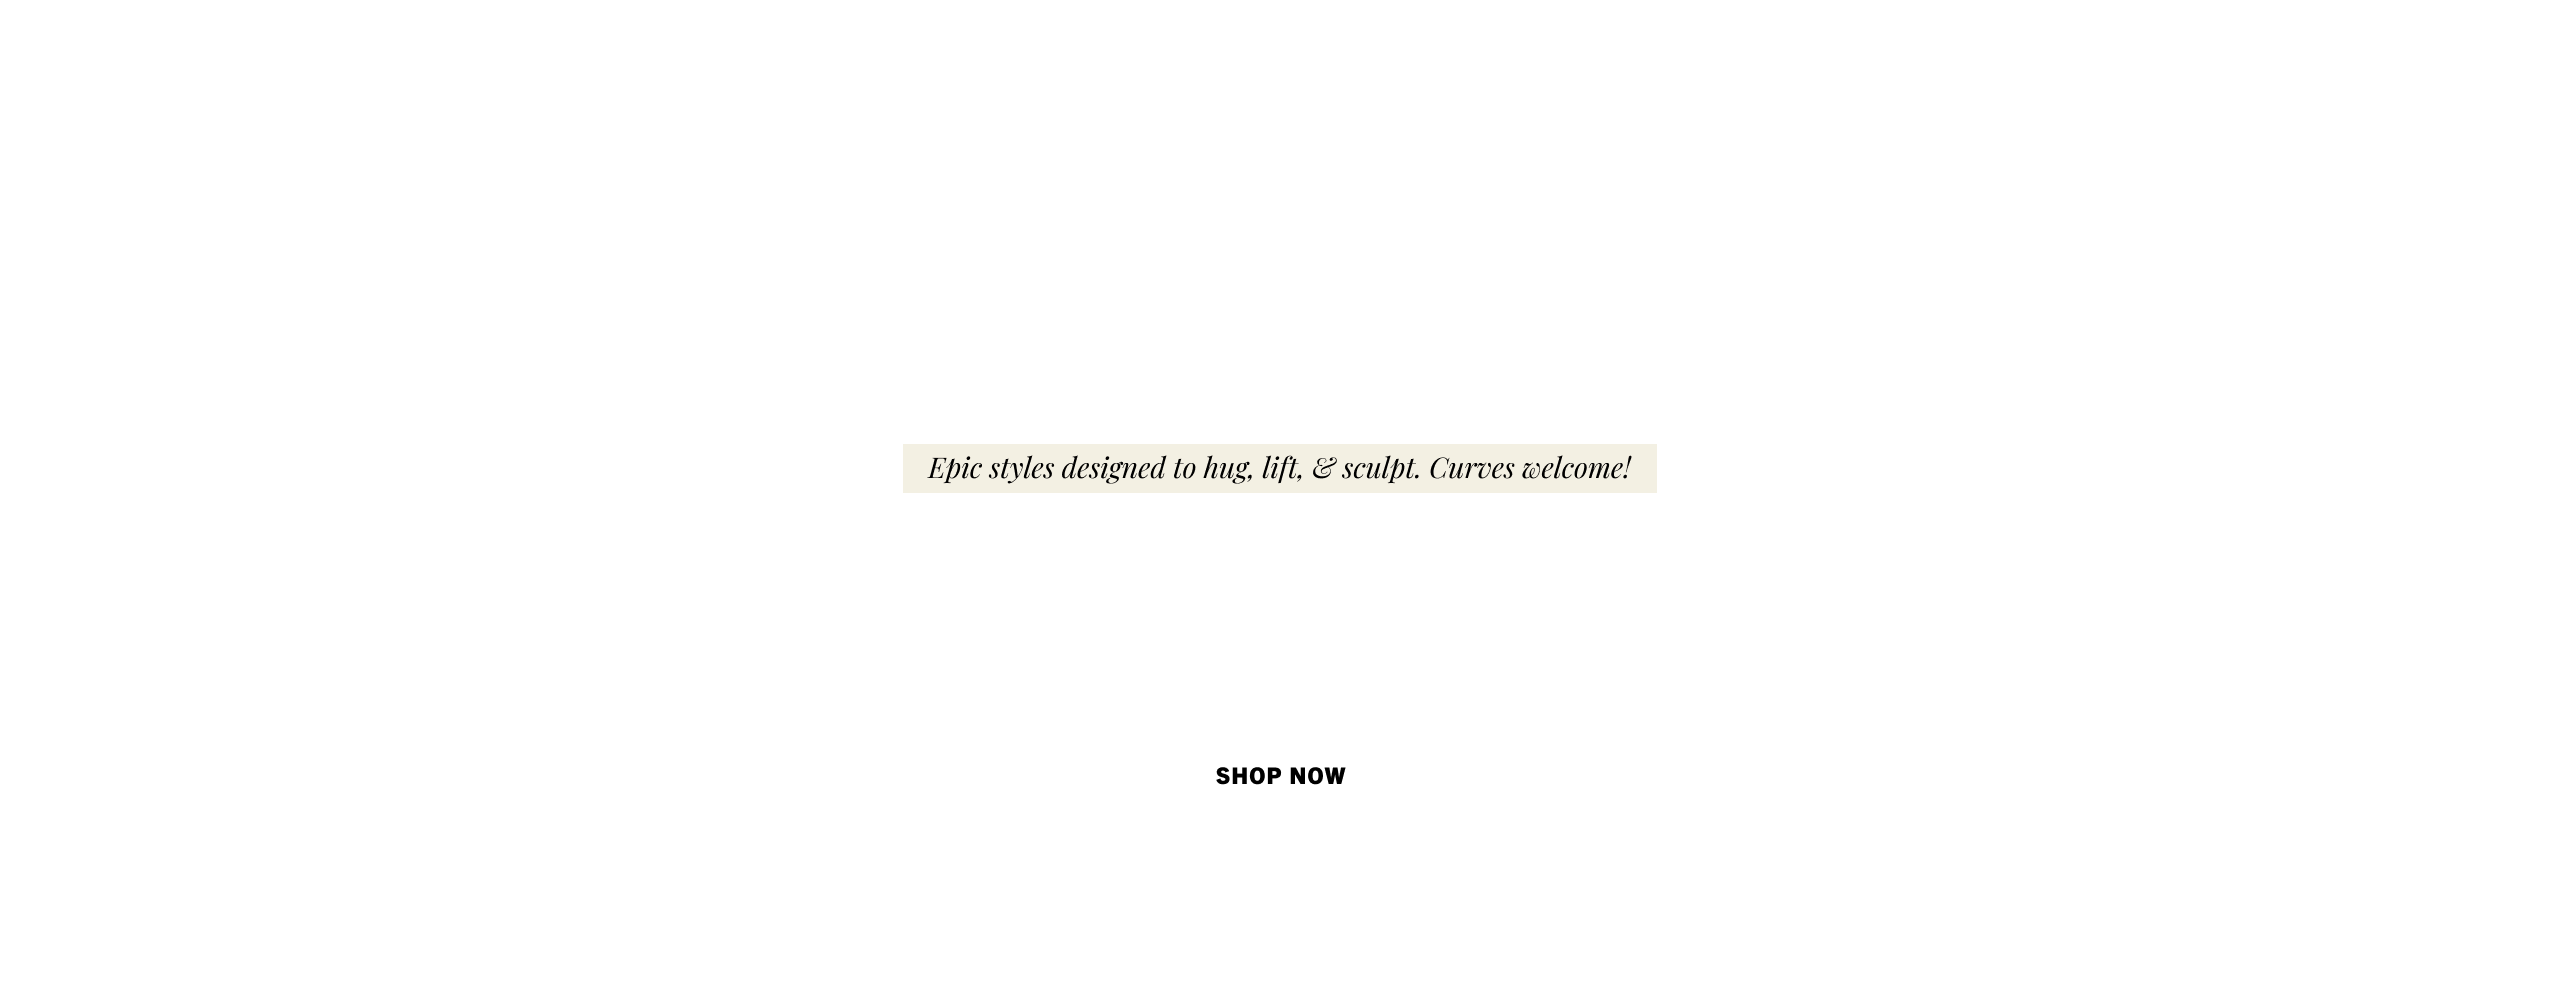 The biggest drop of the year: The Khloe Edit! Get 2 for $24 bottoms + 70% off everything when you join as a new VIP.